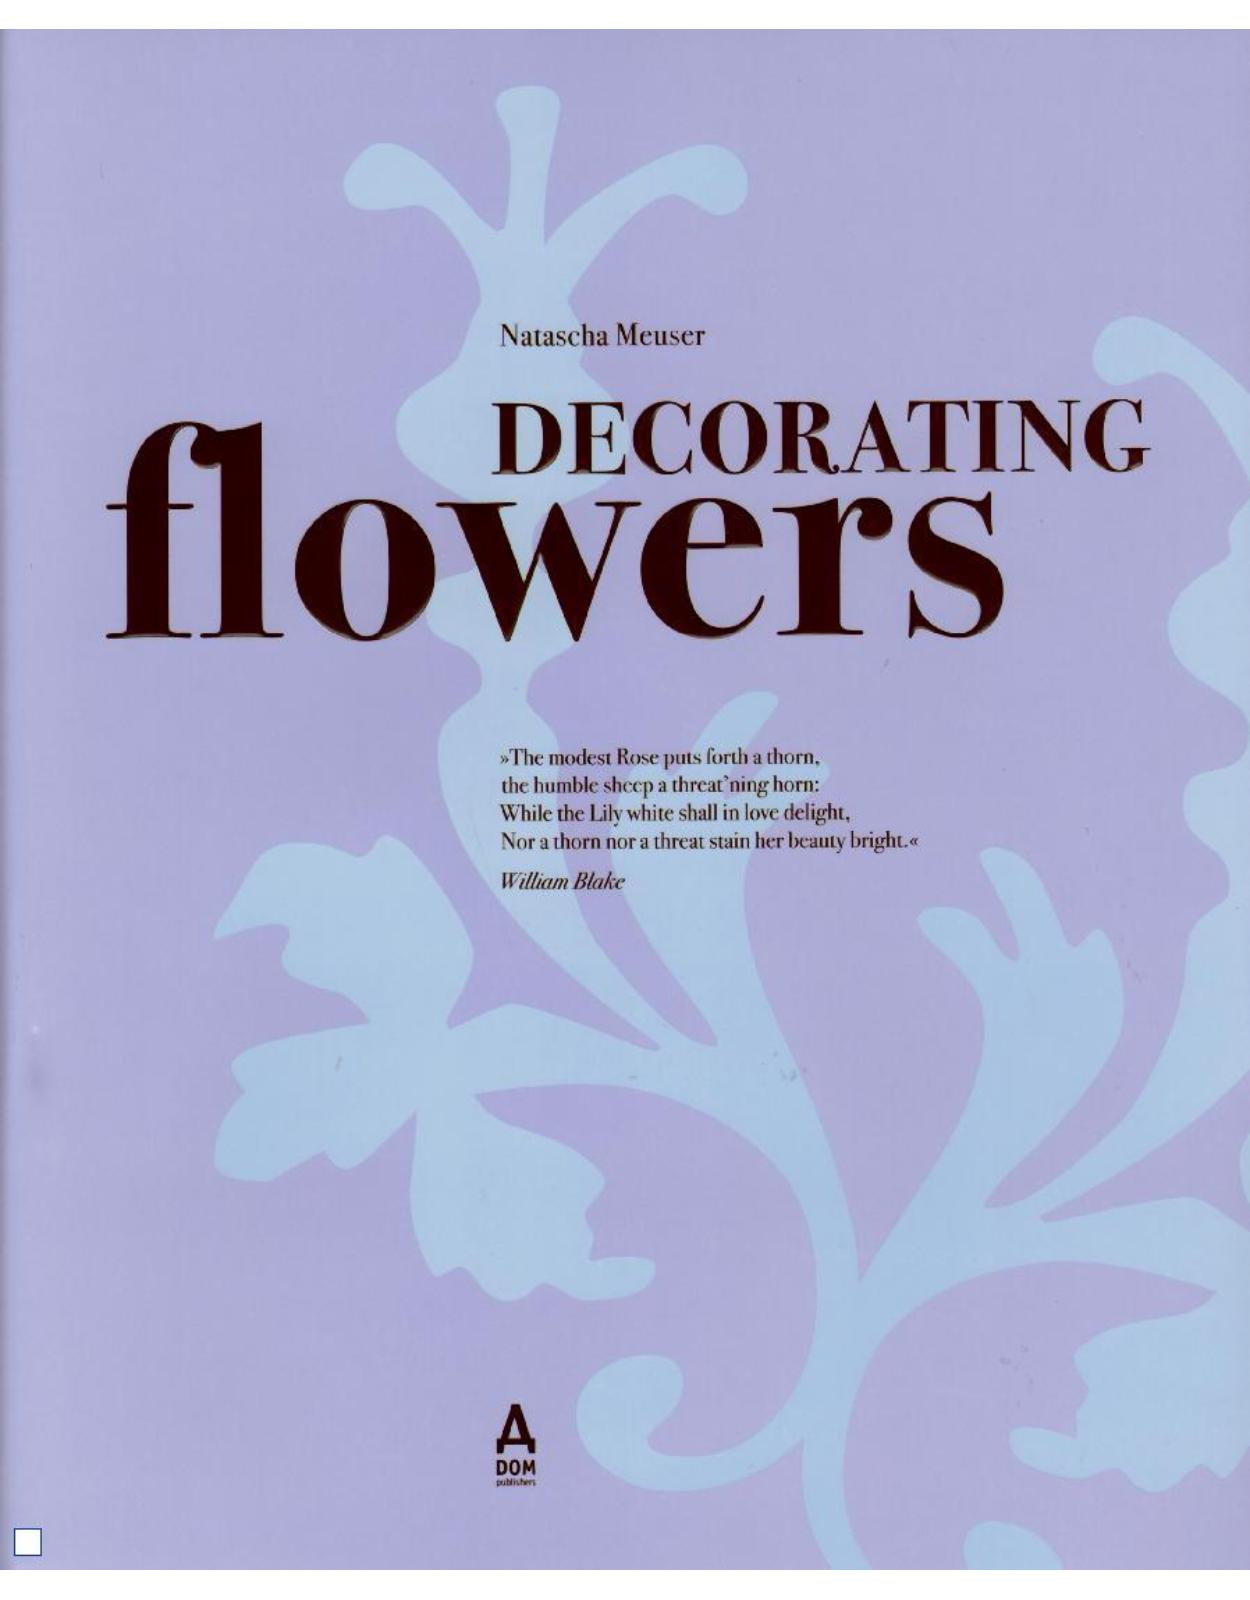 Decorating Flowers: A Celebration of the Beauty of Blossoms